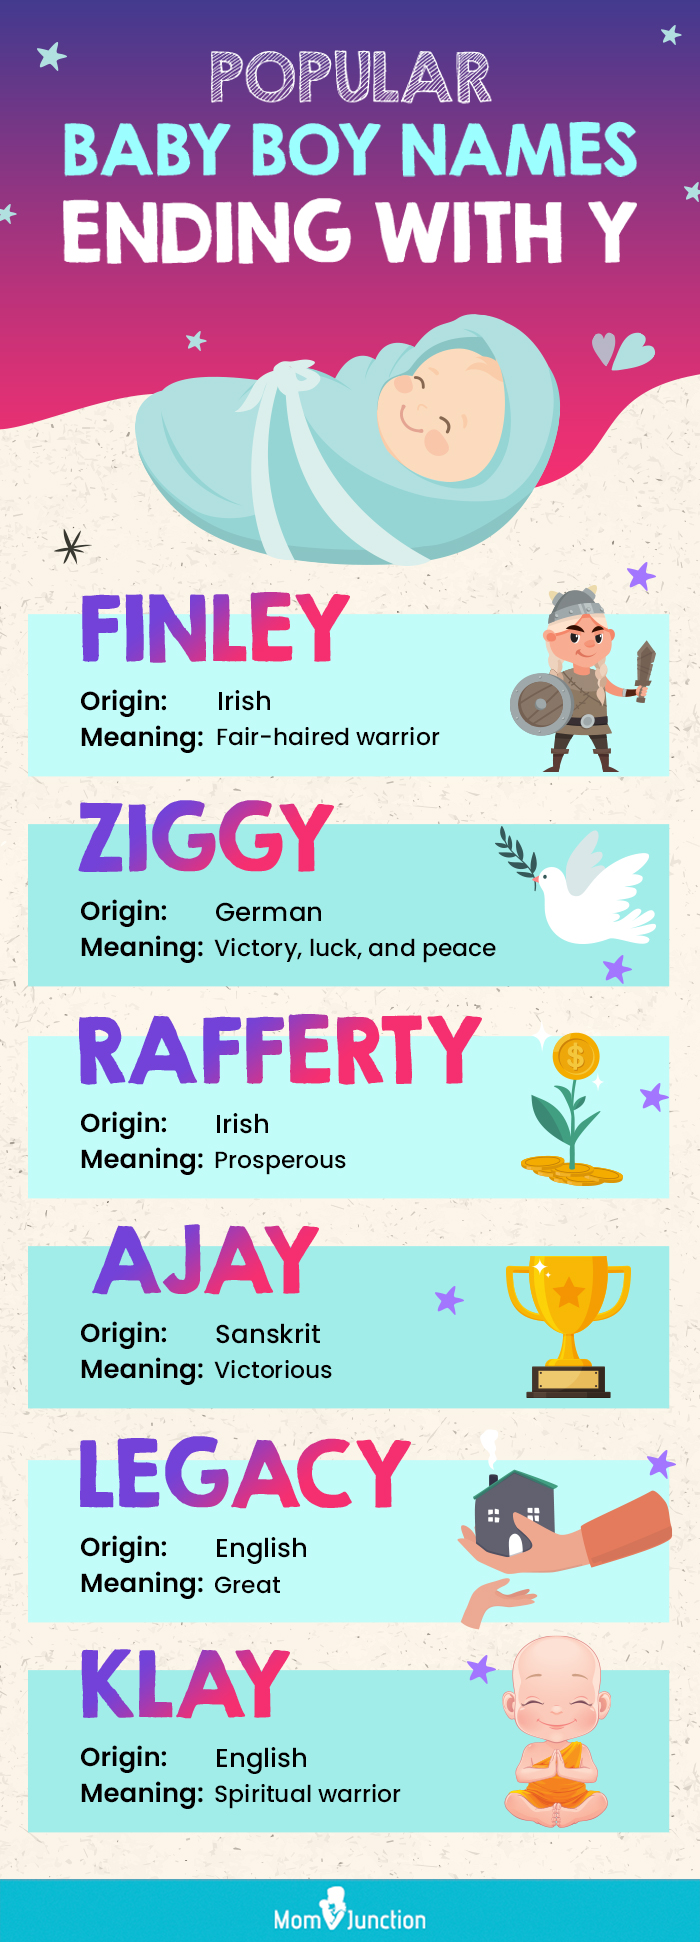 baby boy names ending with y (infographic)